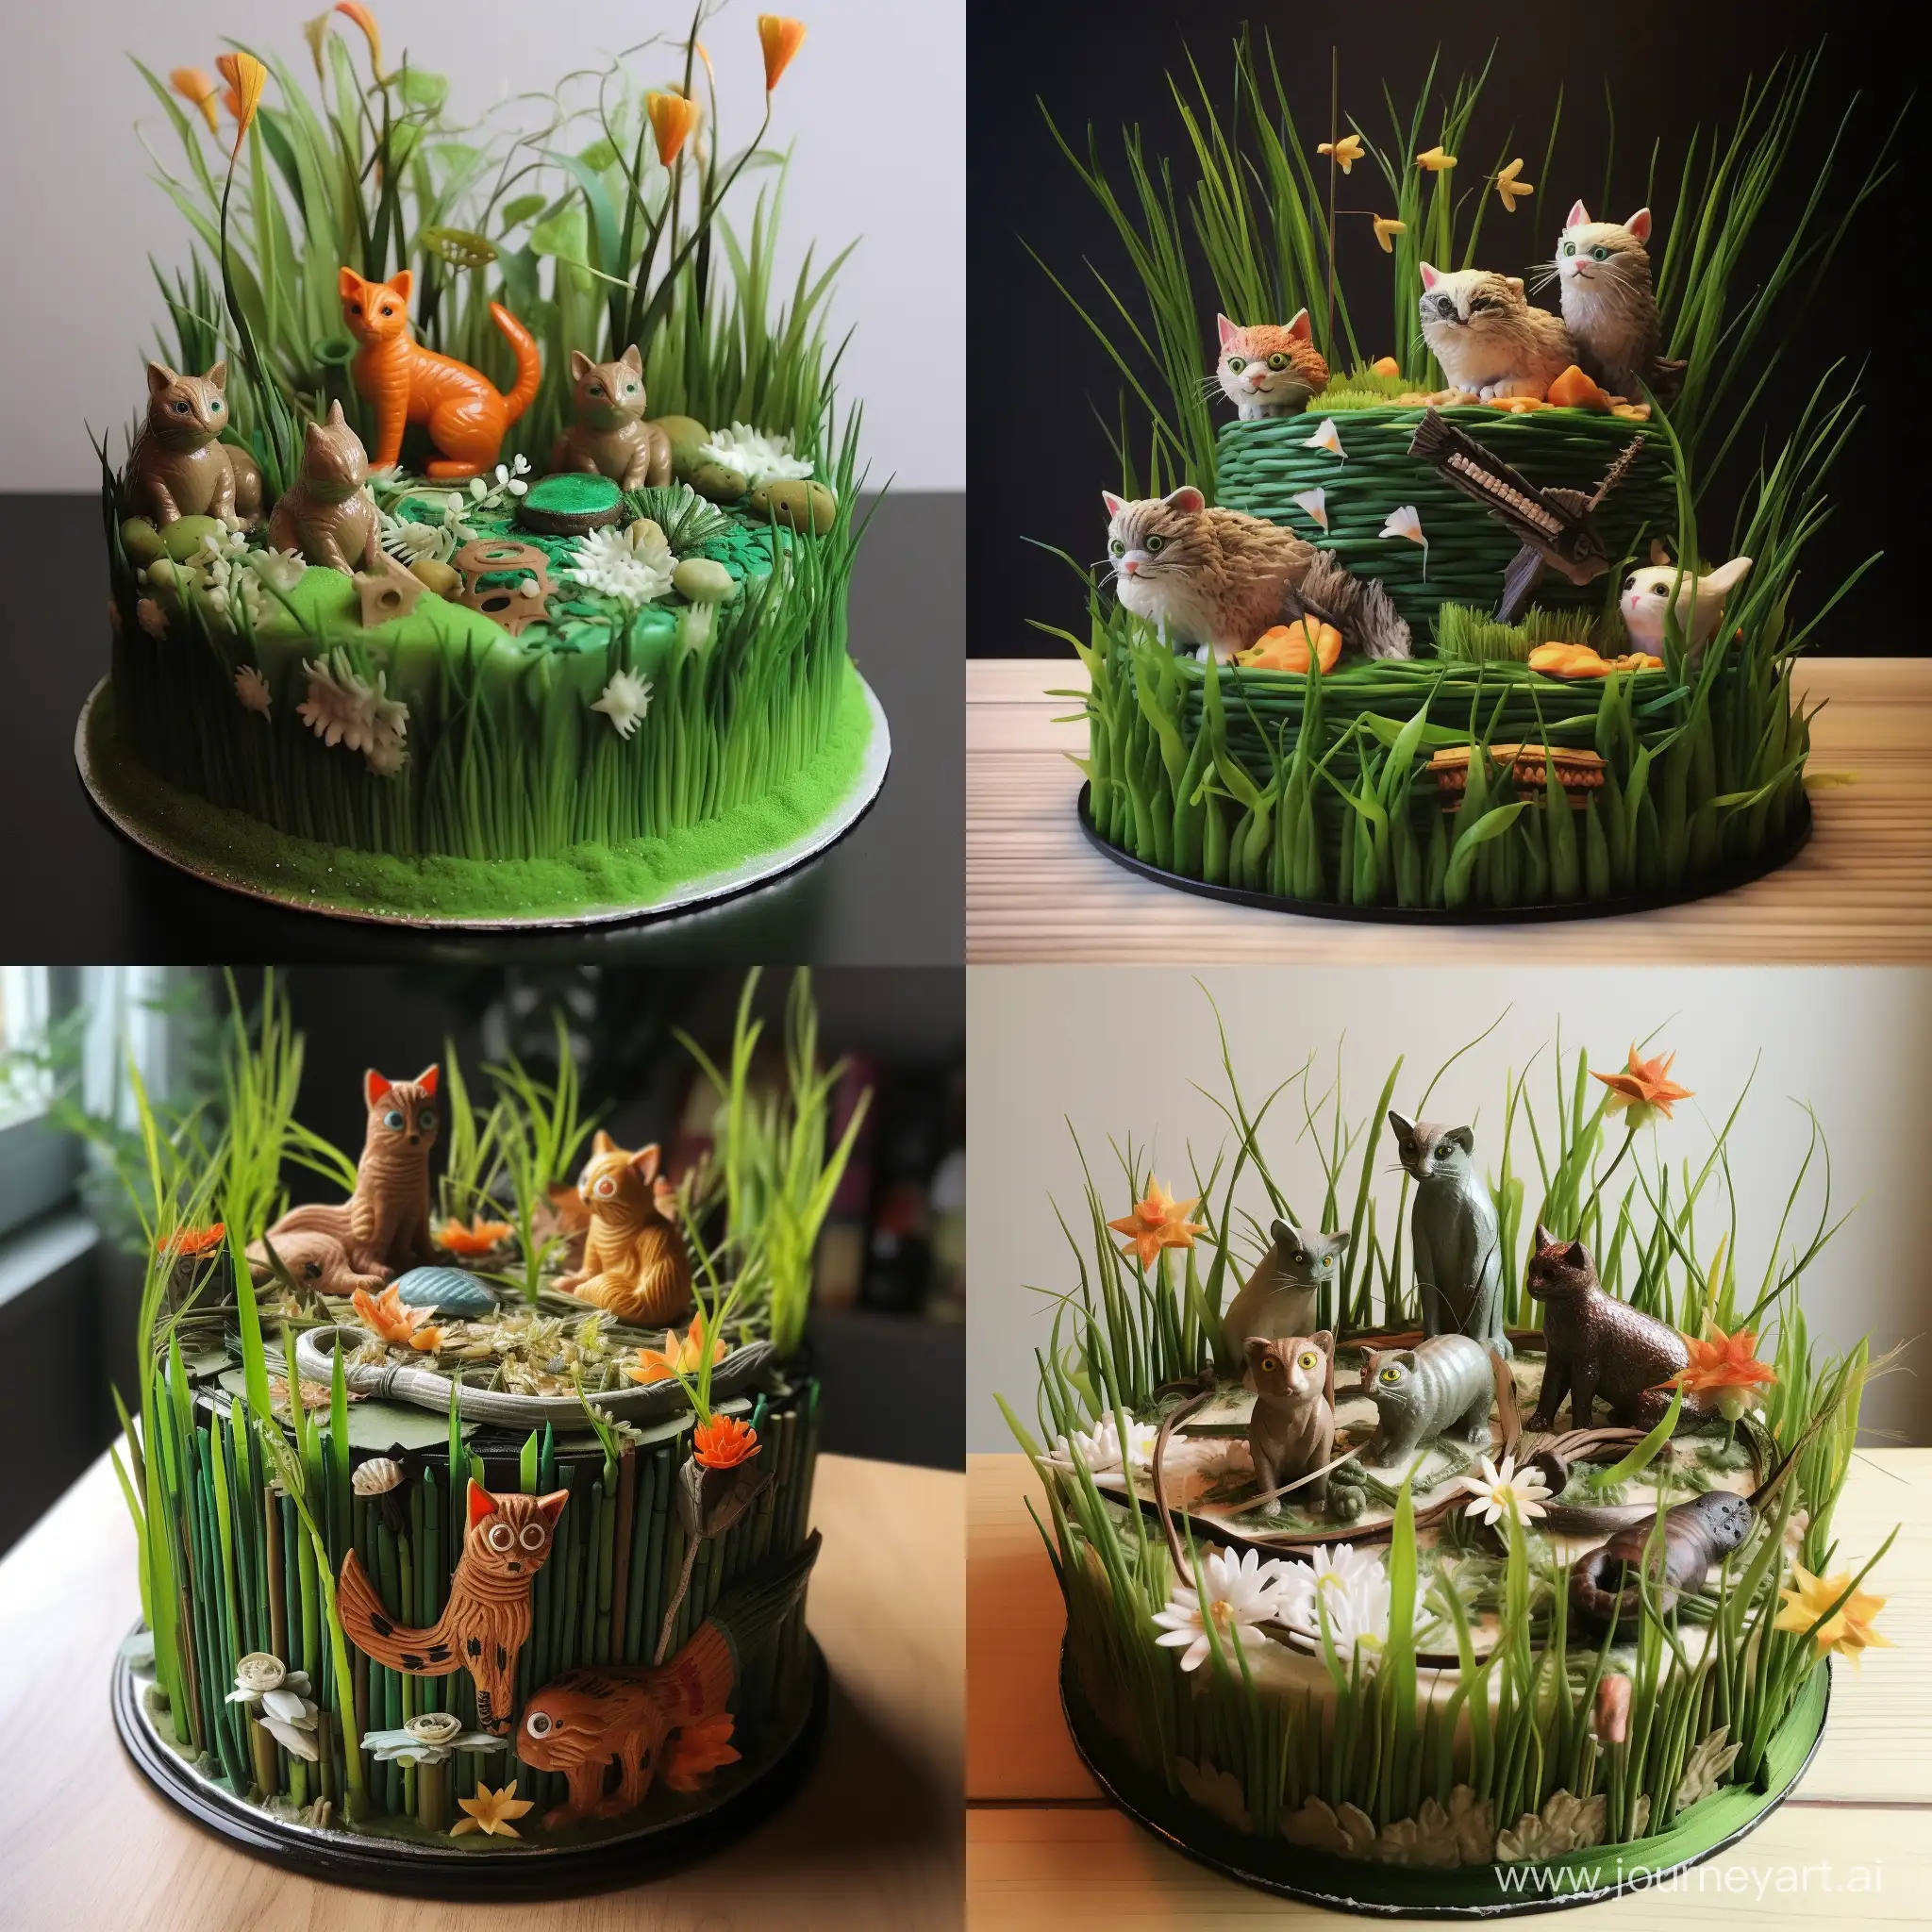 Eccentric-Savory-Cake-with-Animalthemed-Decor-and-Cat-Grass